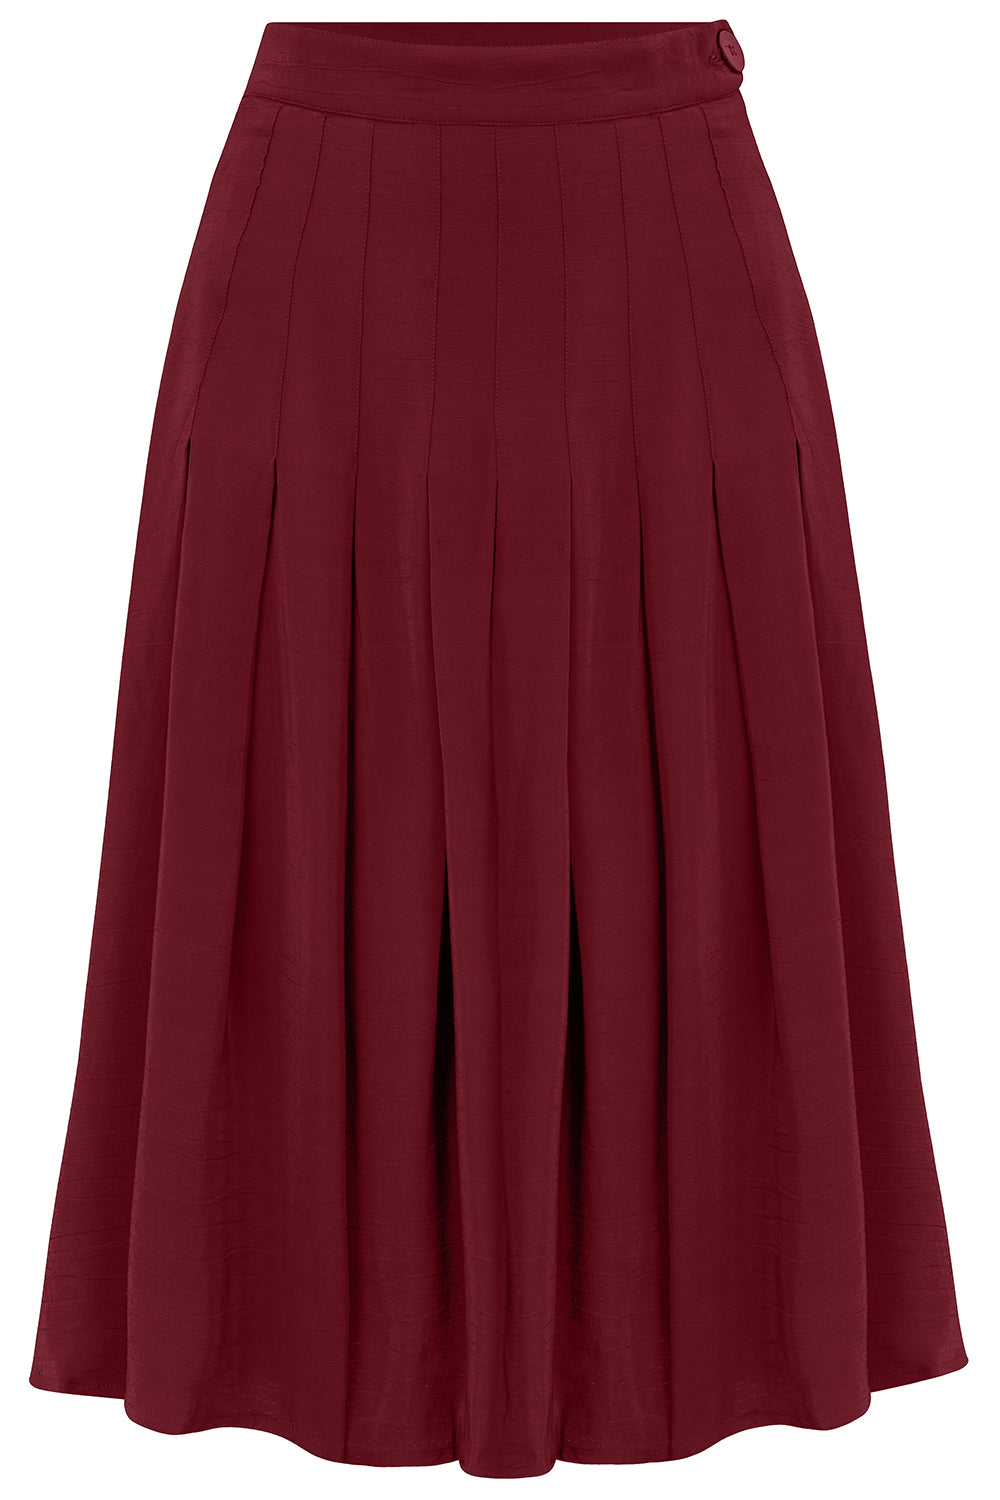 The "Lucille" Pleated Skirt in Windsor Wine, Classic & Authentic 1940s Vintage Inspired Style